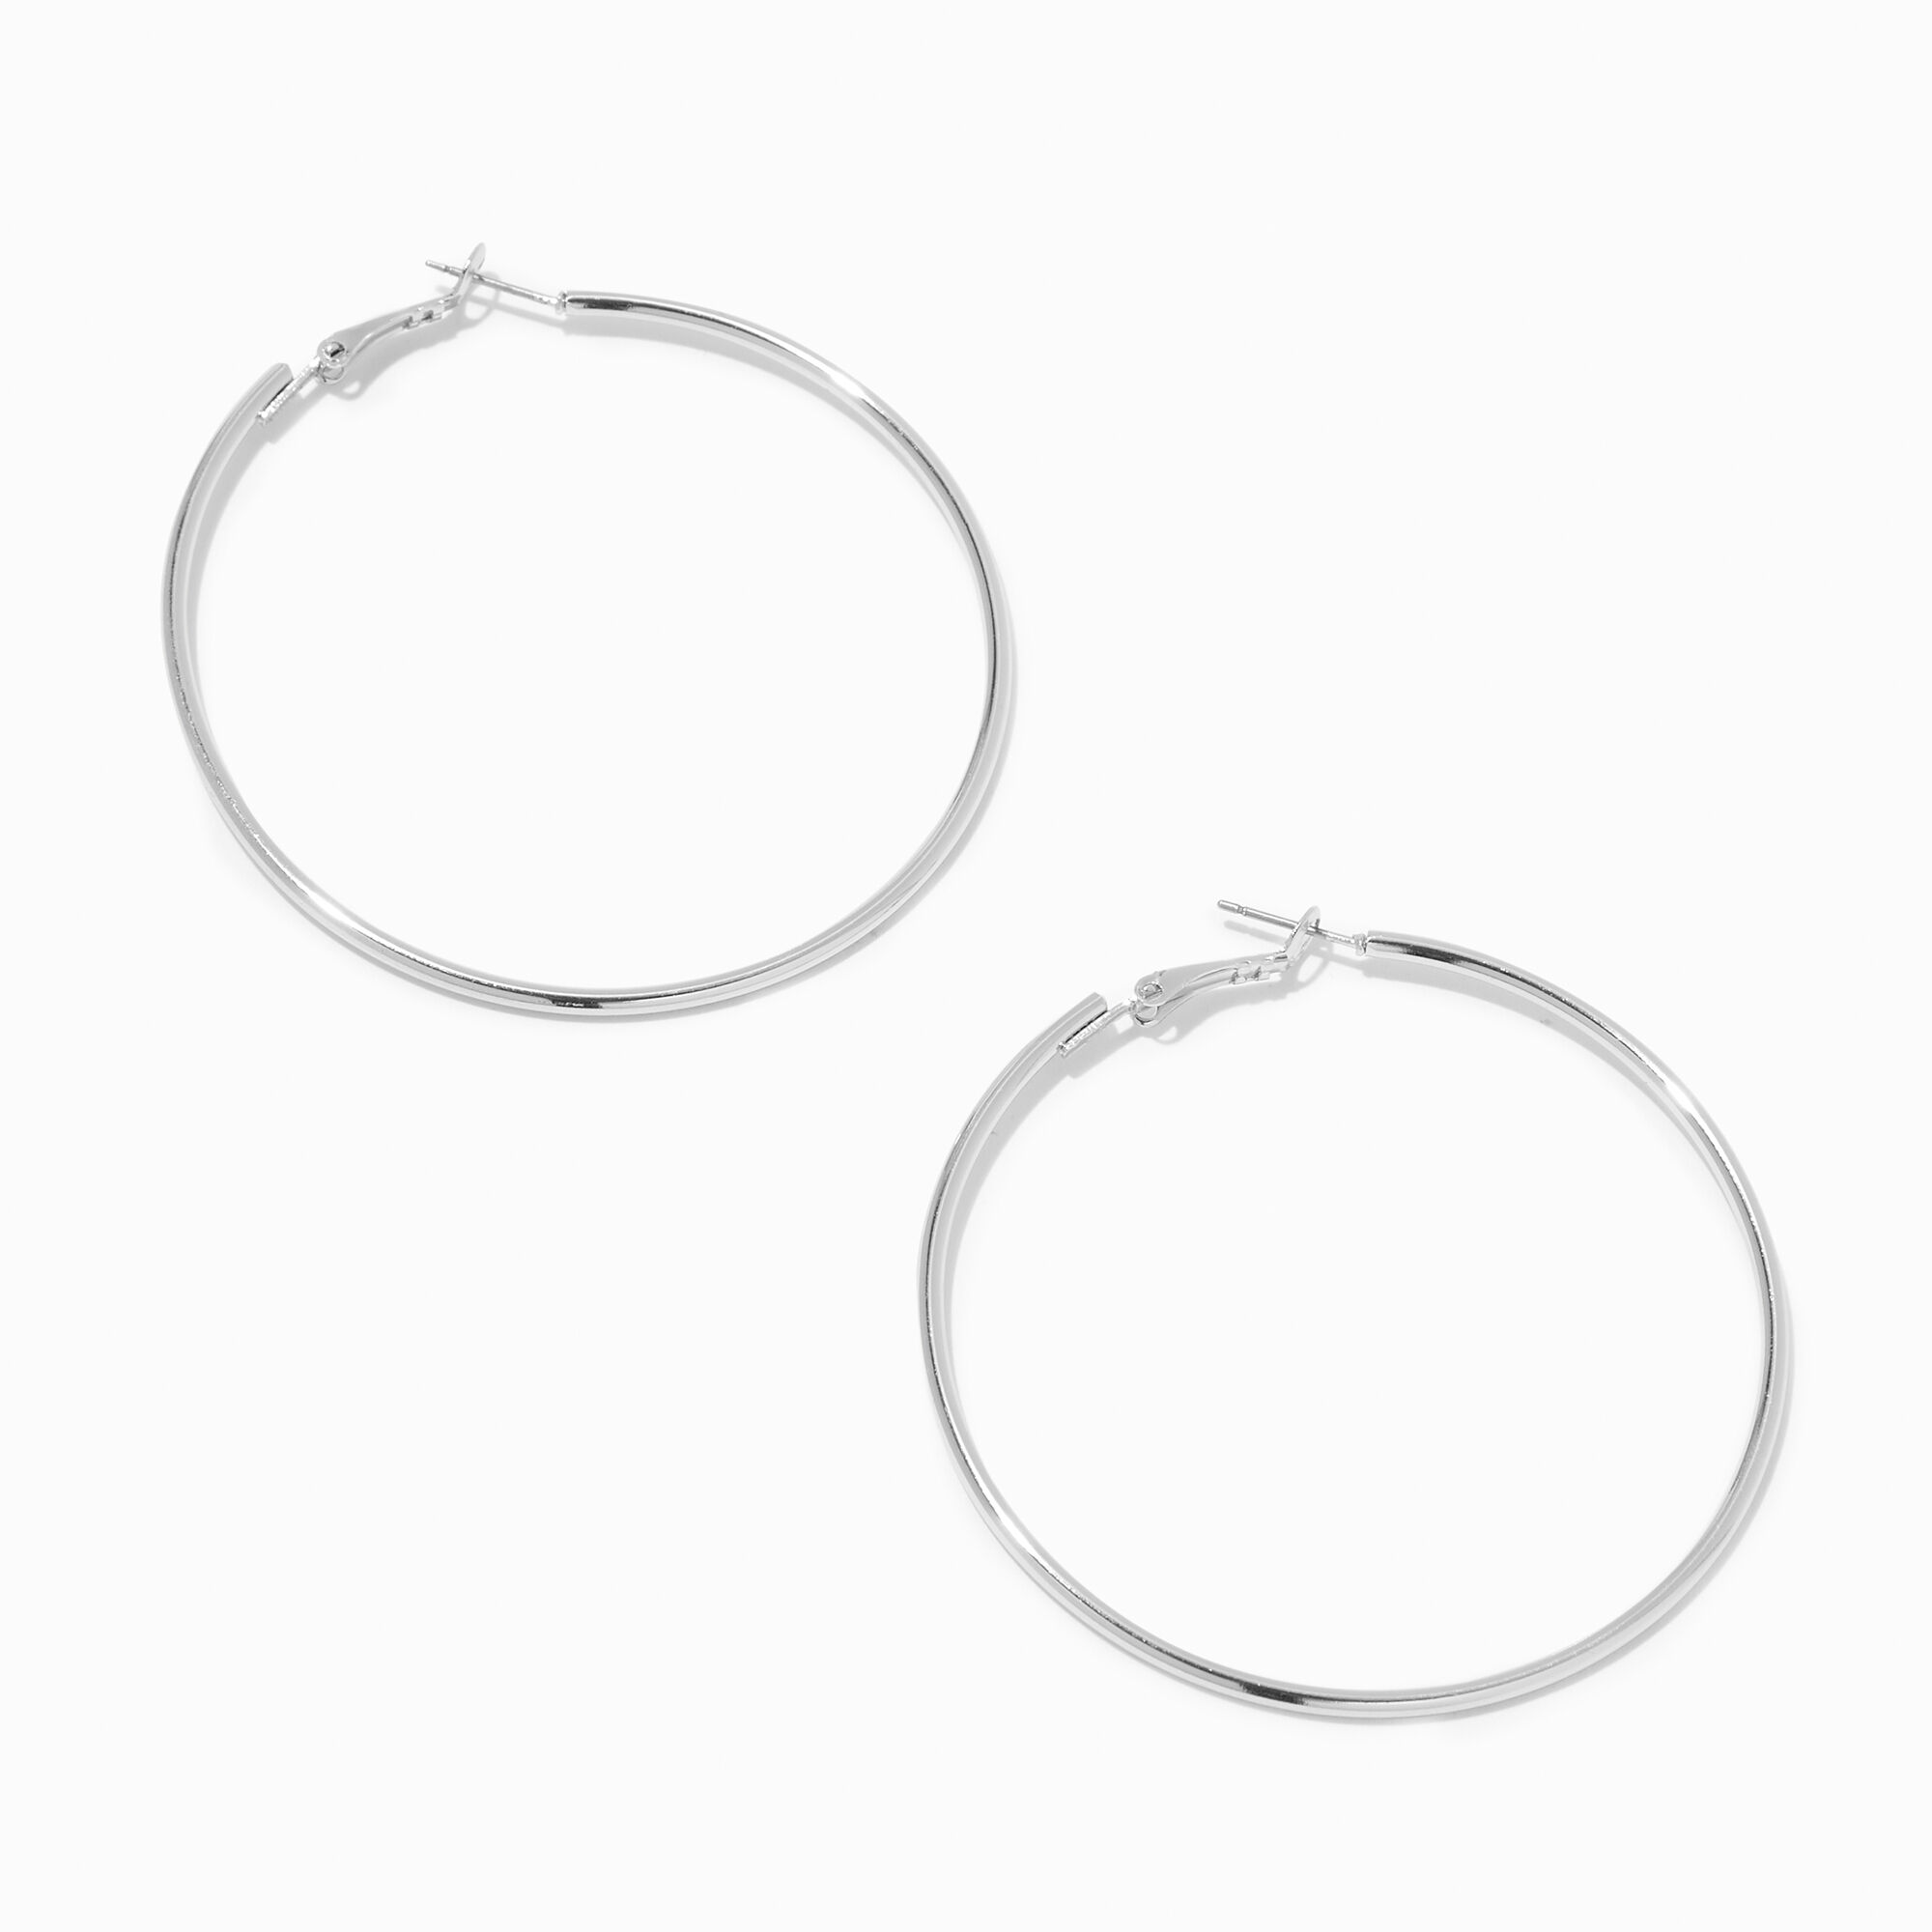 View Claires Recycled Jewelry Tone 60MM Hoop Earrings Silver information